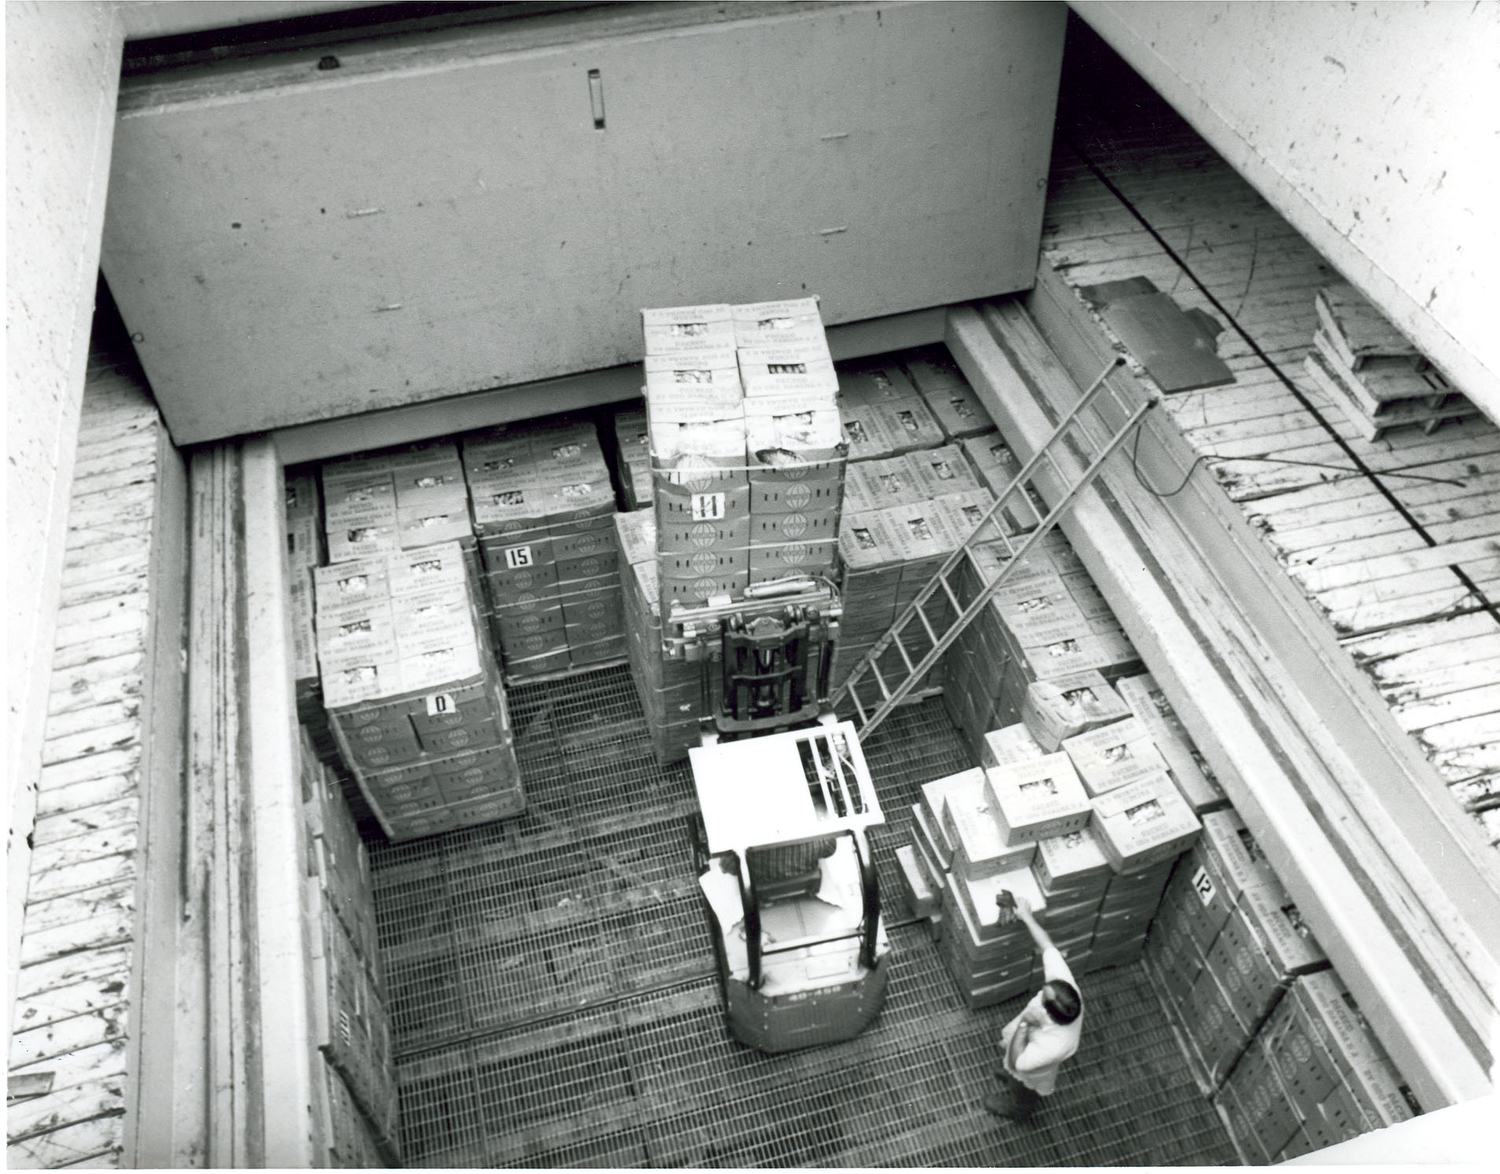 Citrus exports were big business at the Port of Long Beach in the Ô70s. Crates are stored in a hold; today, fruit is shipped in refrigerated containers.